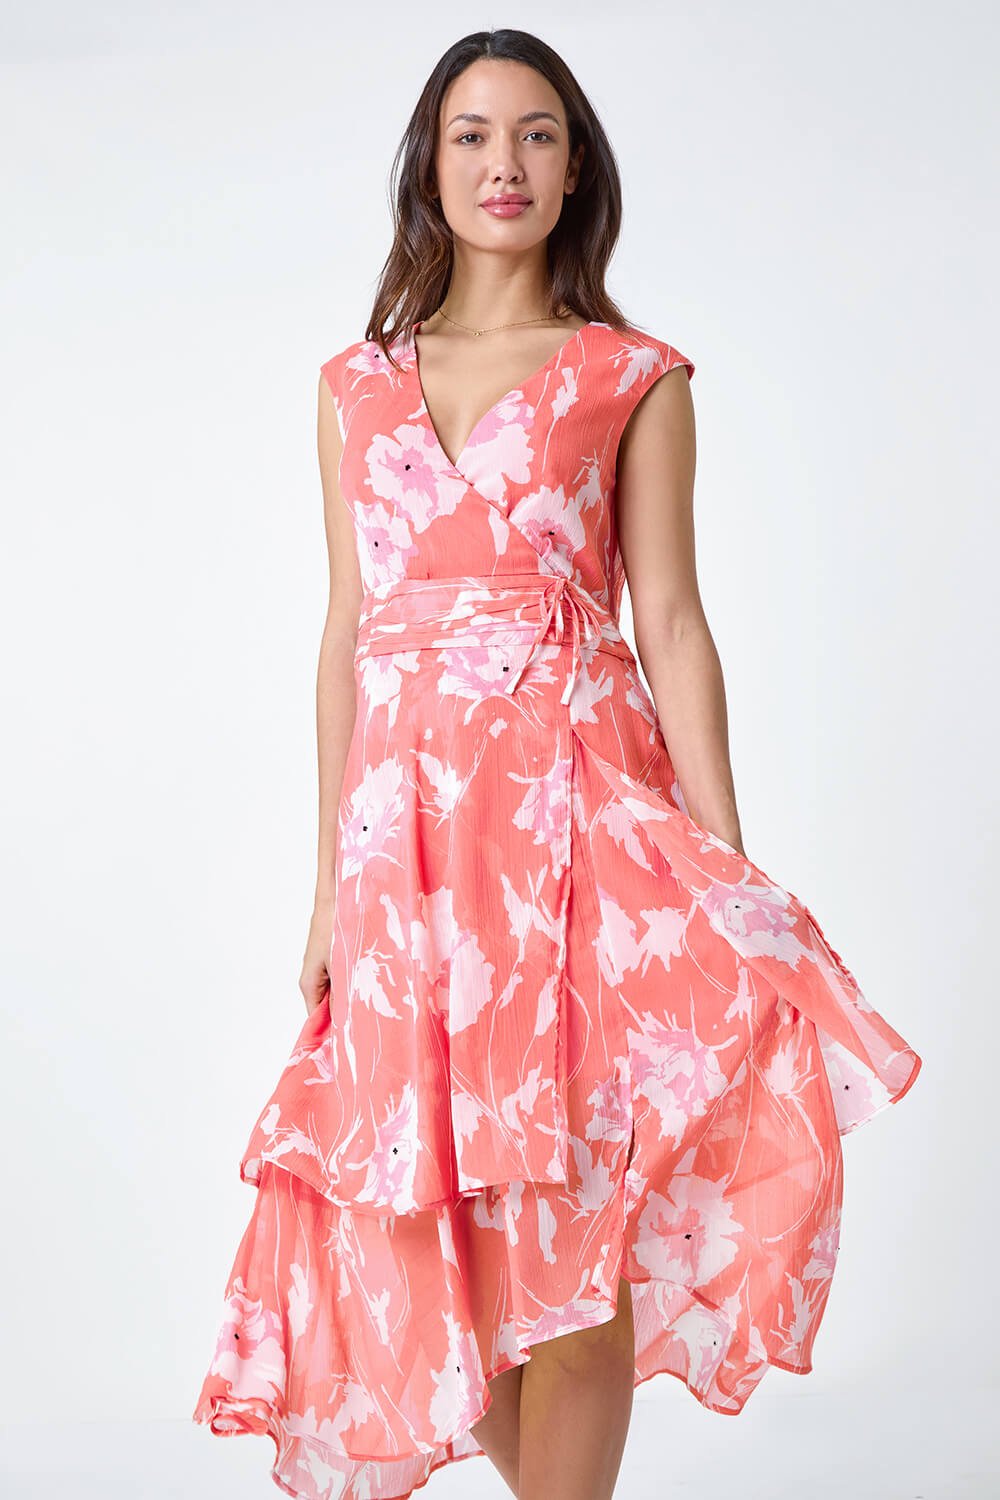 CORAL Embellished Floral Print Tiered Midi Dress, Image 1 of 5